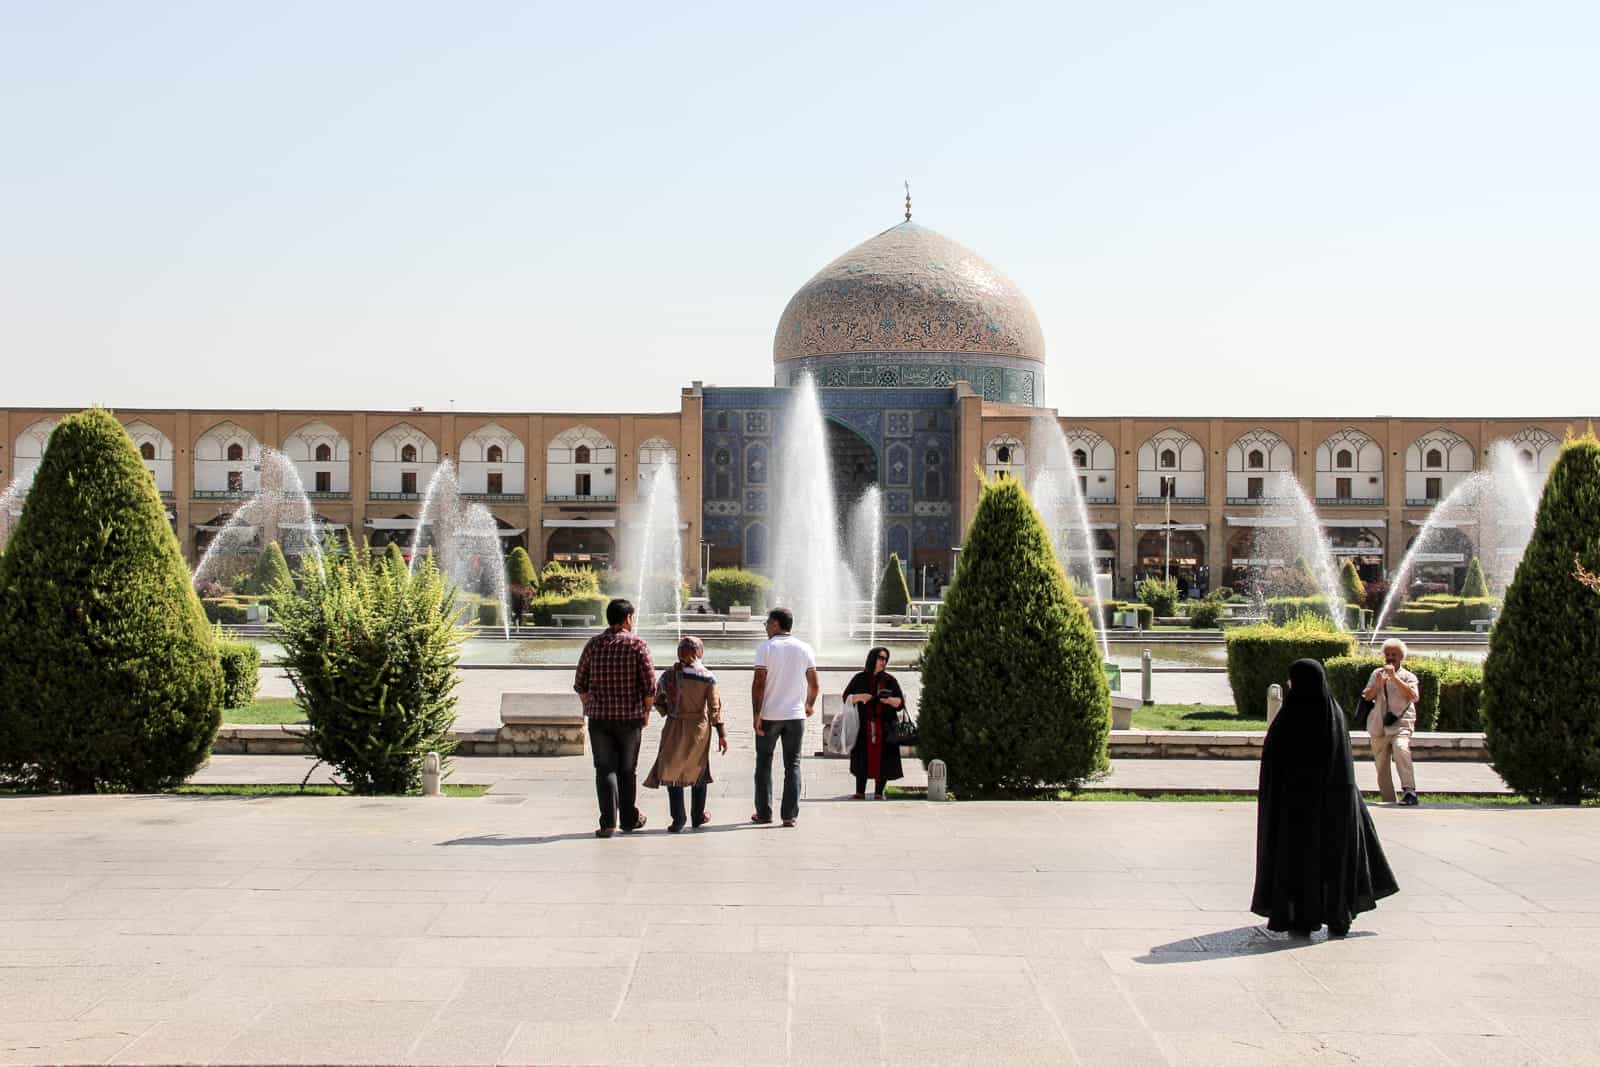 Travel to Iran and see the modern next to sites of ancient Persia